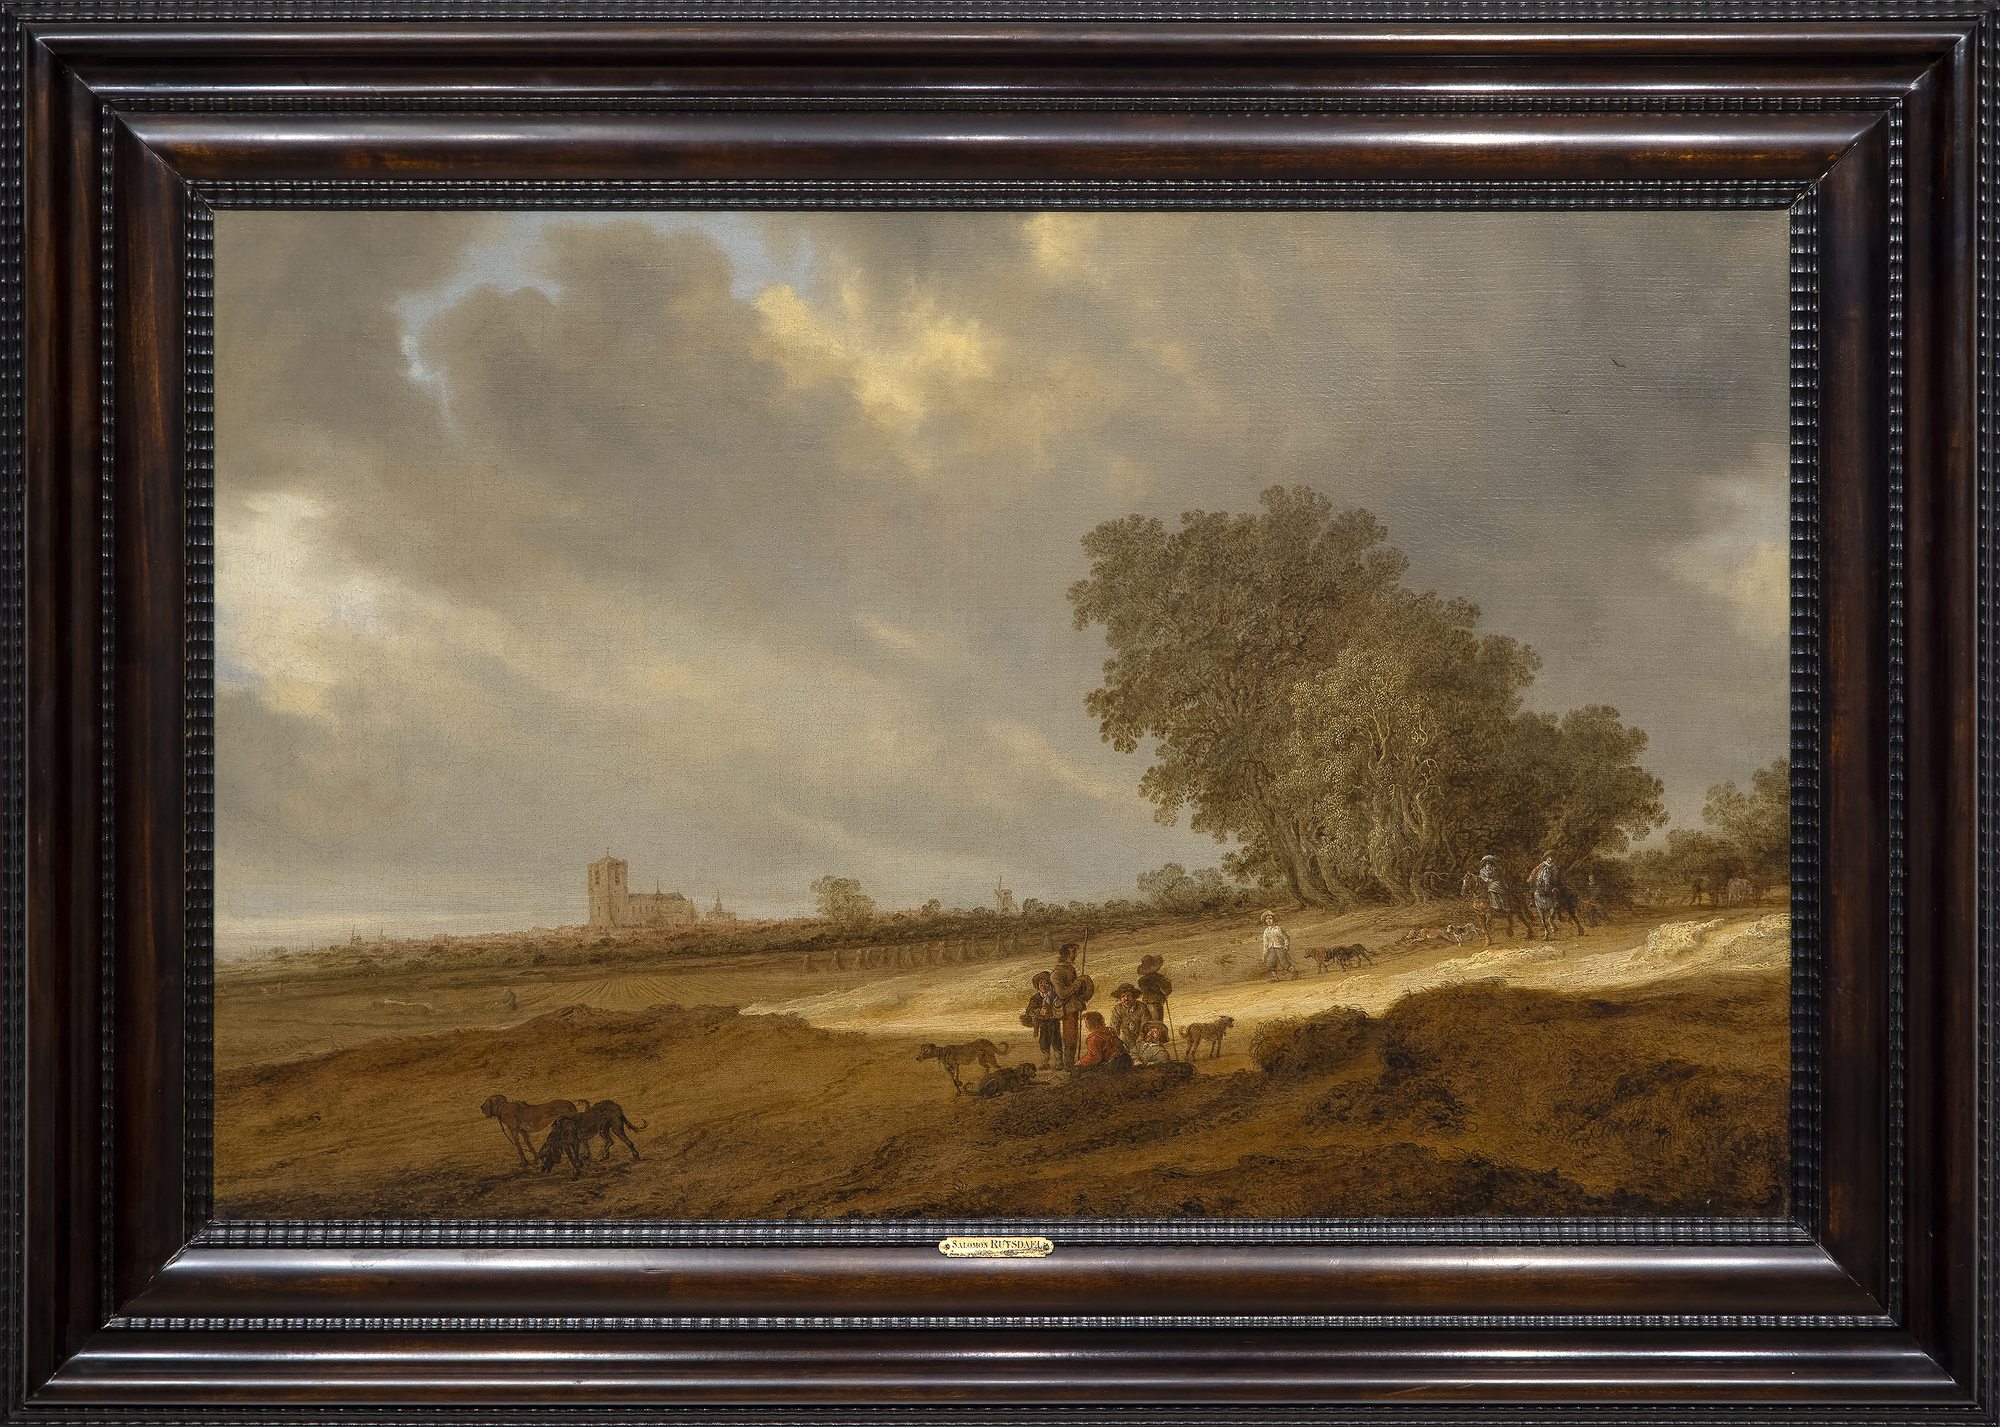 SALOMON VAN RUYSDAEL - A Dune Landscape with Figures Resting and a Couple on Horseback, a View of Nijmegen Cathedral Beyond - oil on canvas - 26 1/2 x 41 1/2 in.